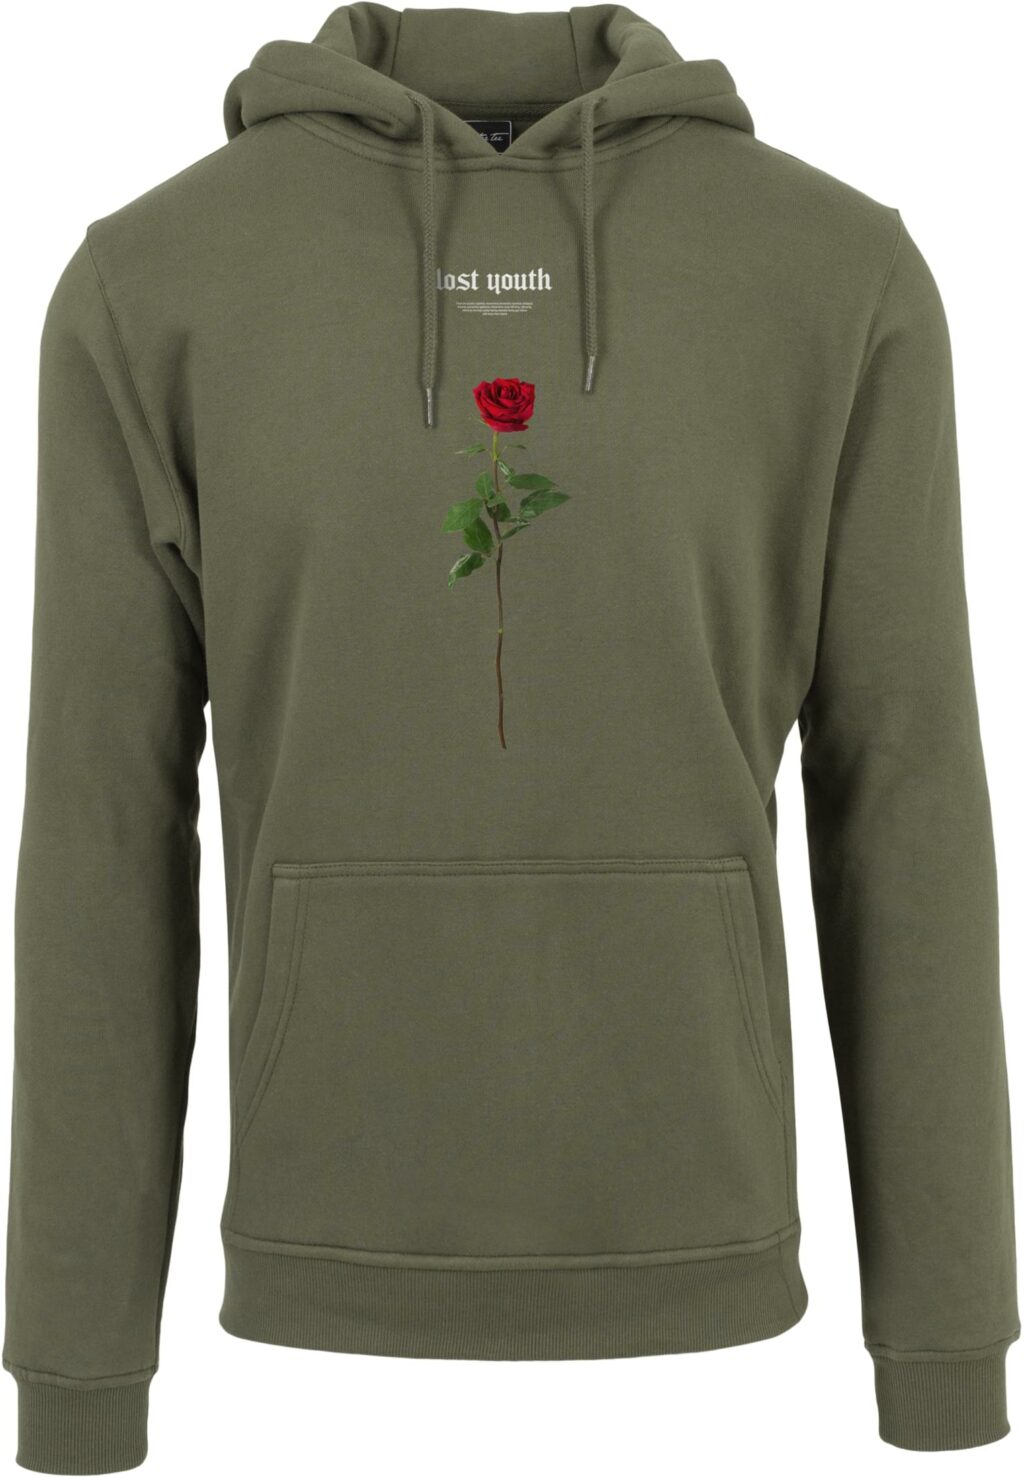 Lost Youth Rose Hoody olive MT2657